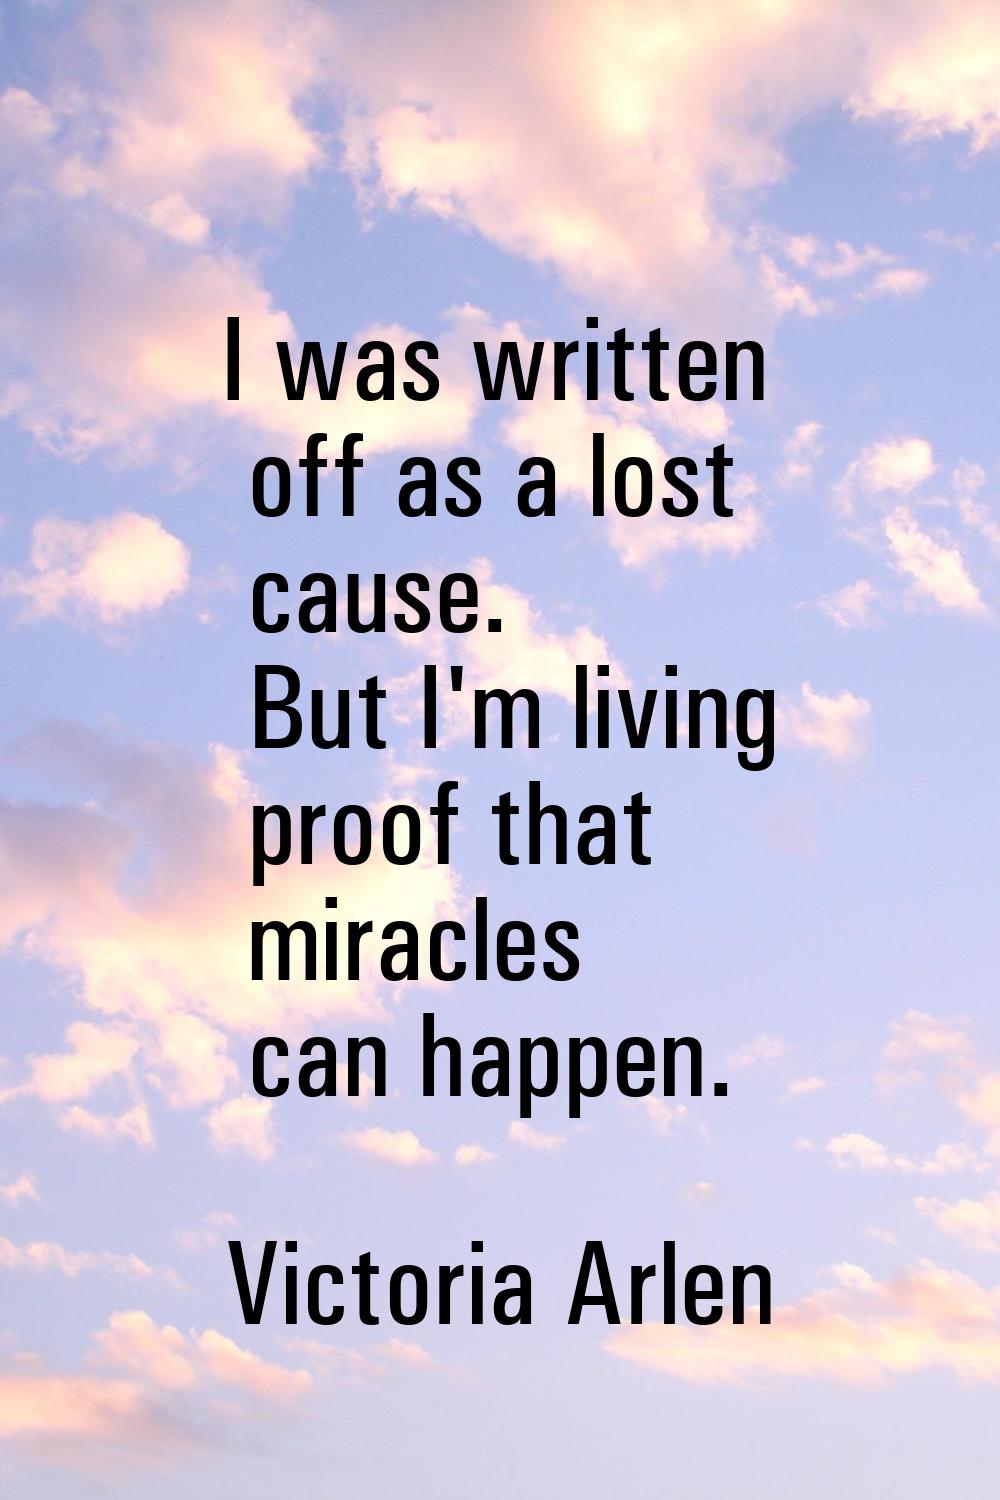 I was written off as a lost cause. But I'm living proof that miracles can happen.